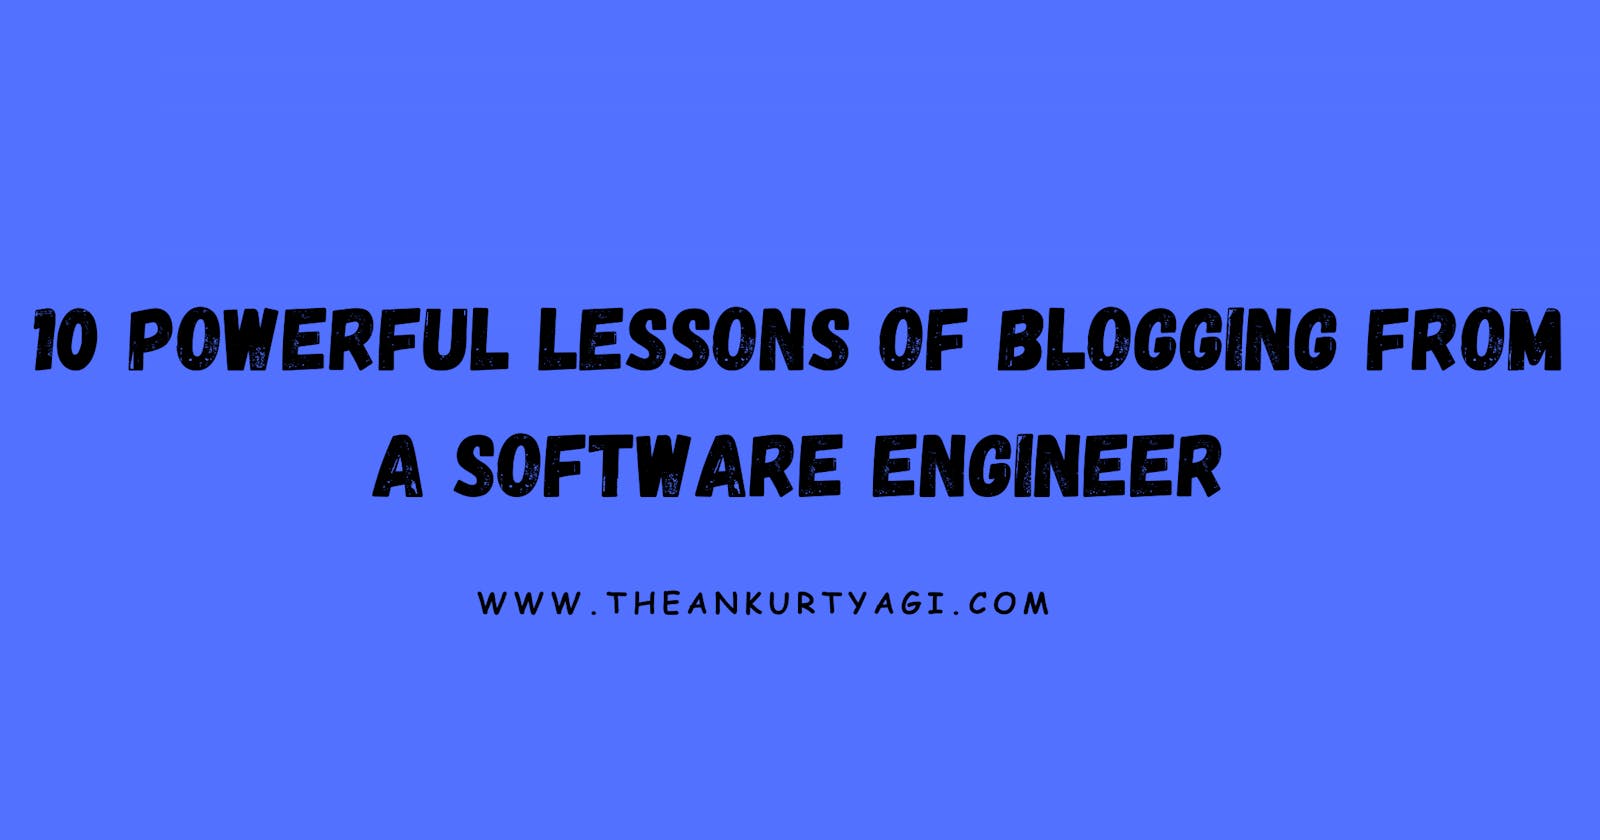 10 Powerful Lessons of Blogging From a Software Engineer